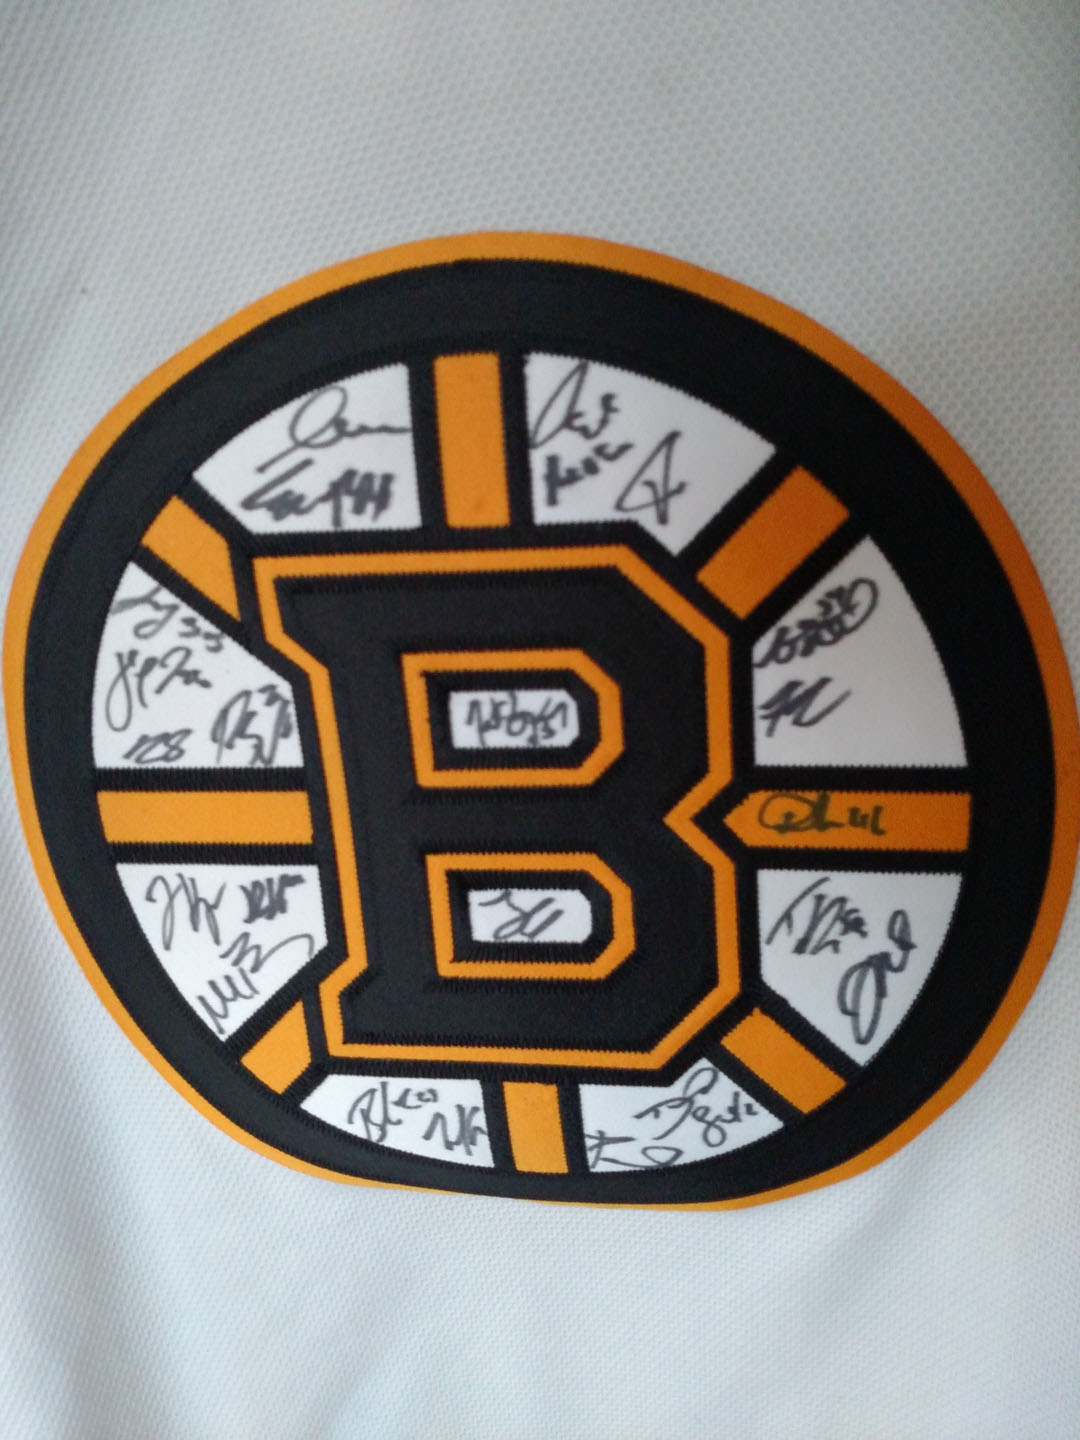 Boston Bruins Autographed Jersey